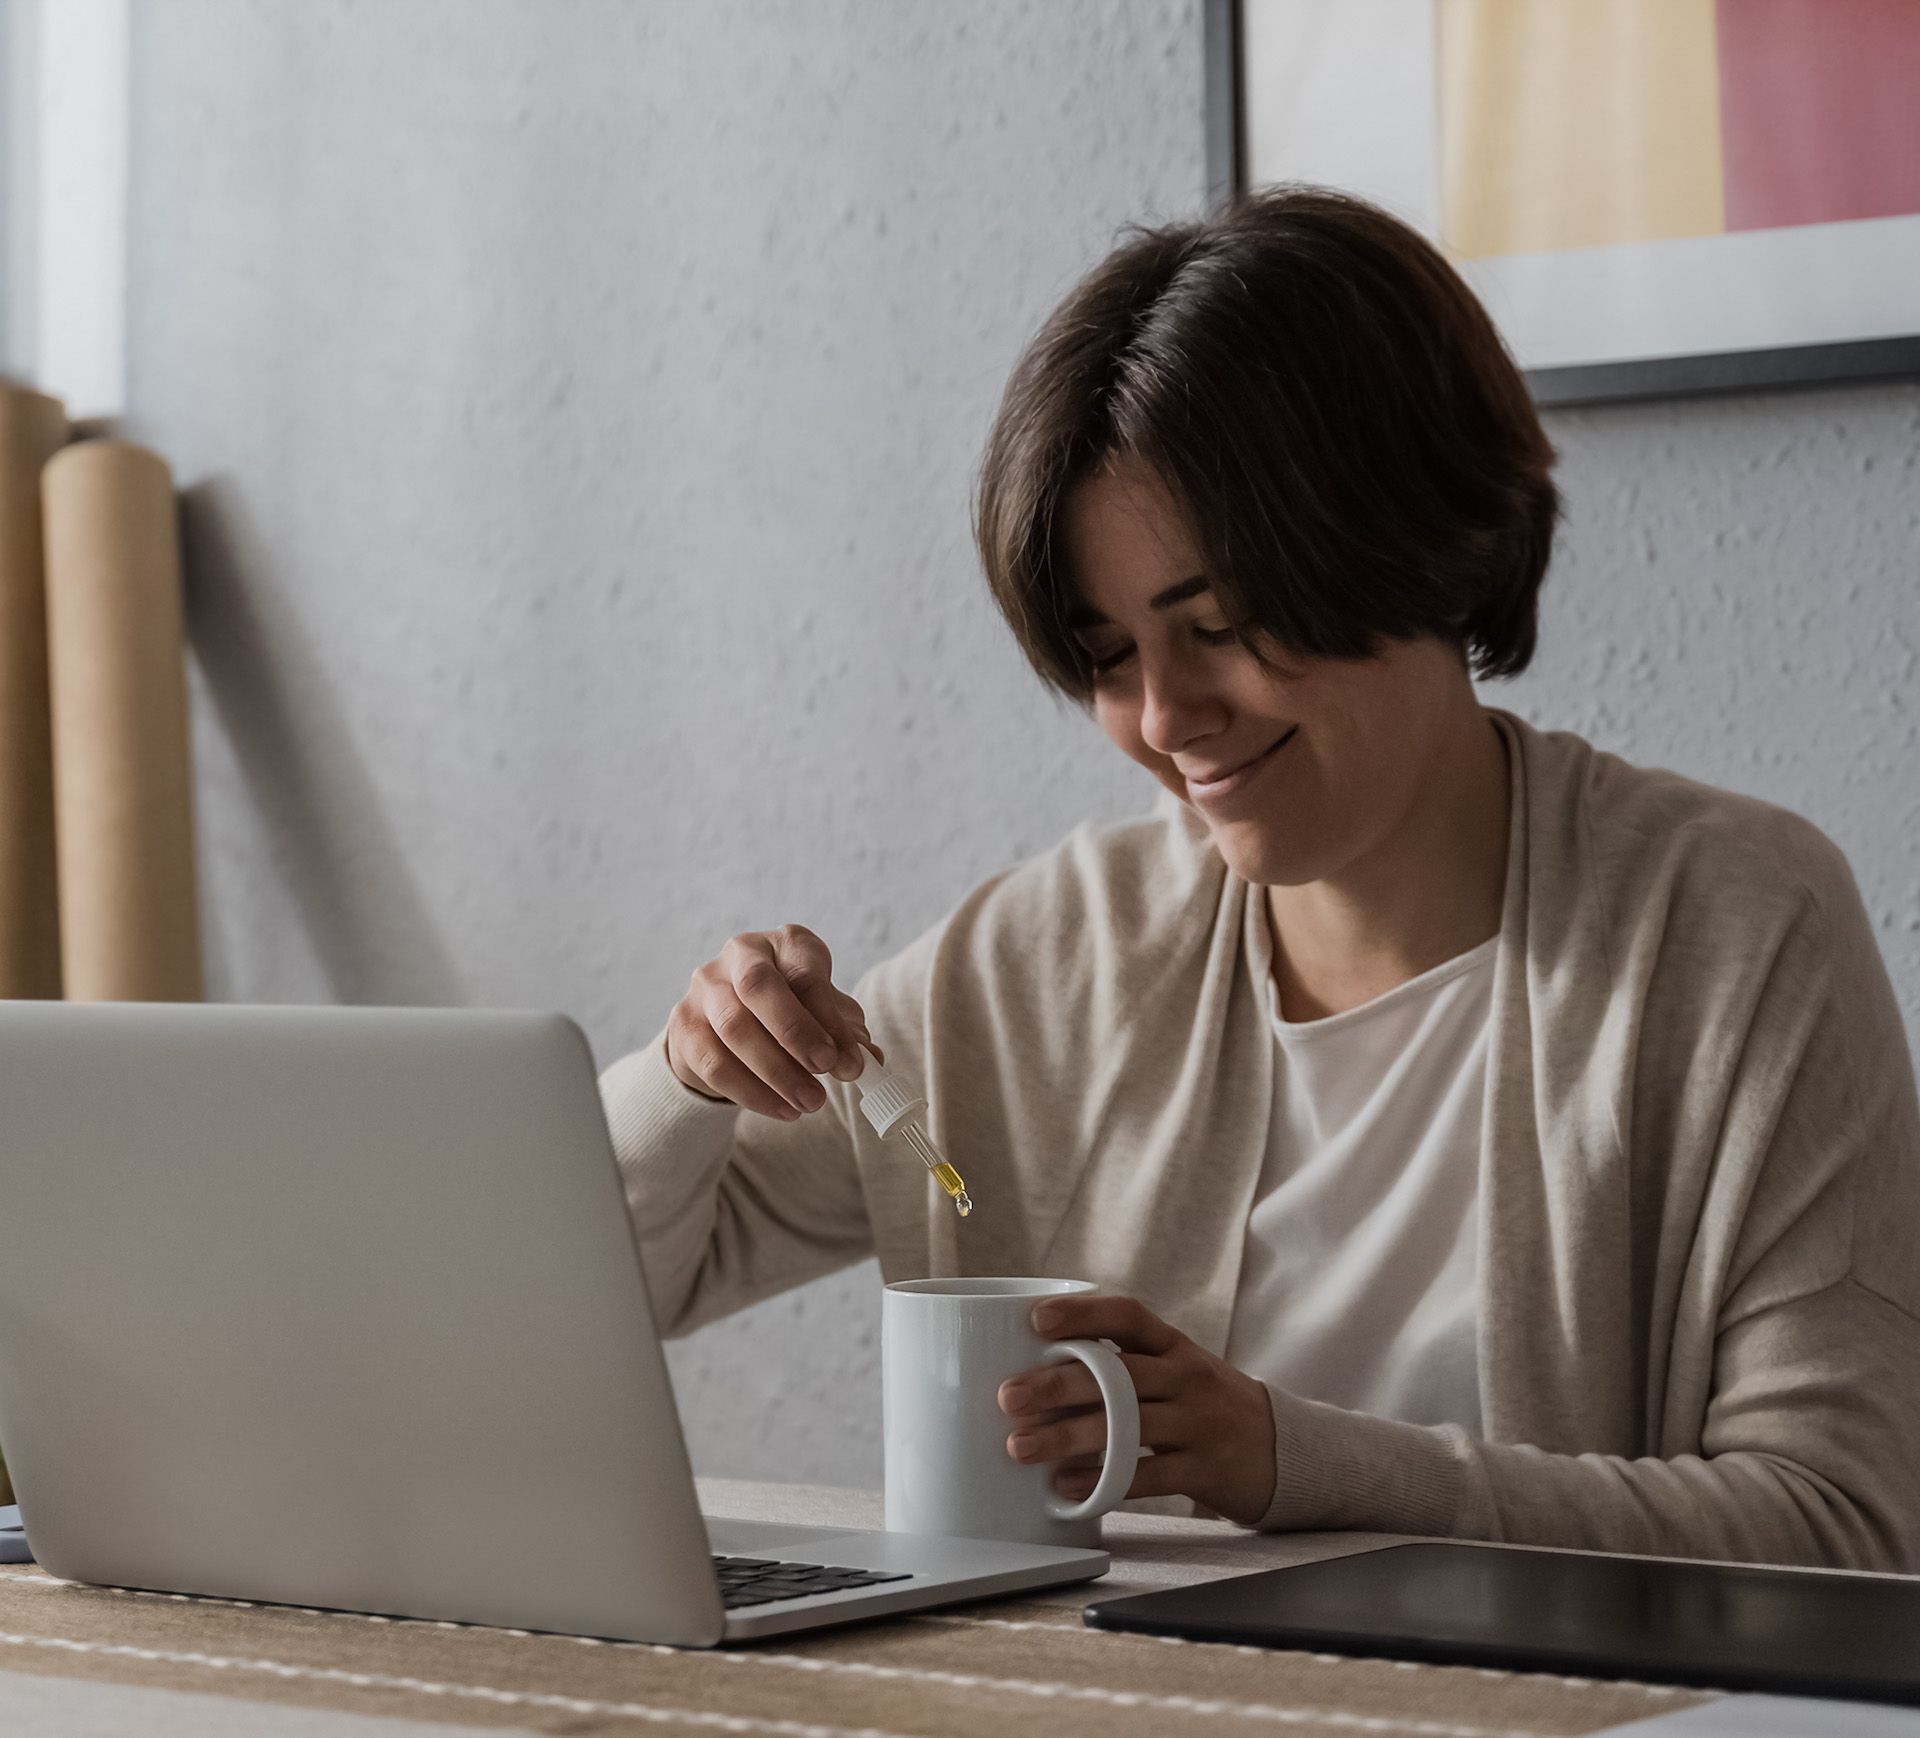 Woman taking cannabidiol oil in tea cup while working at home office